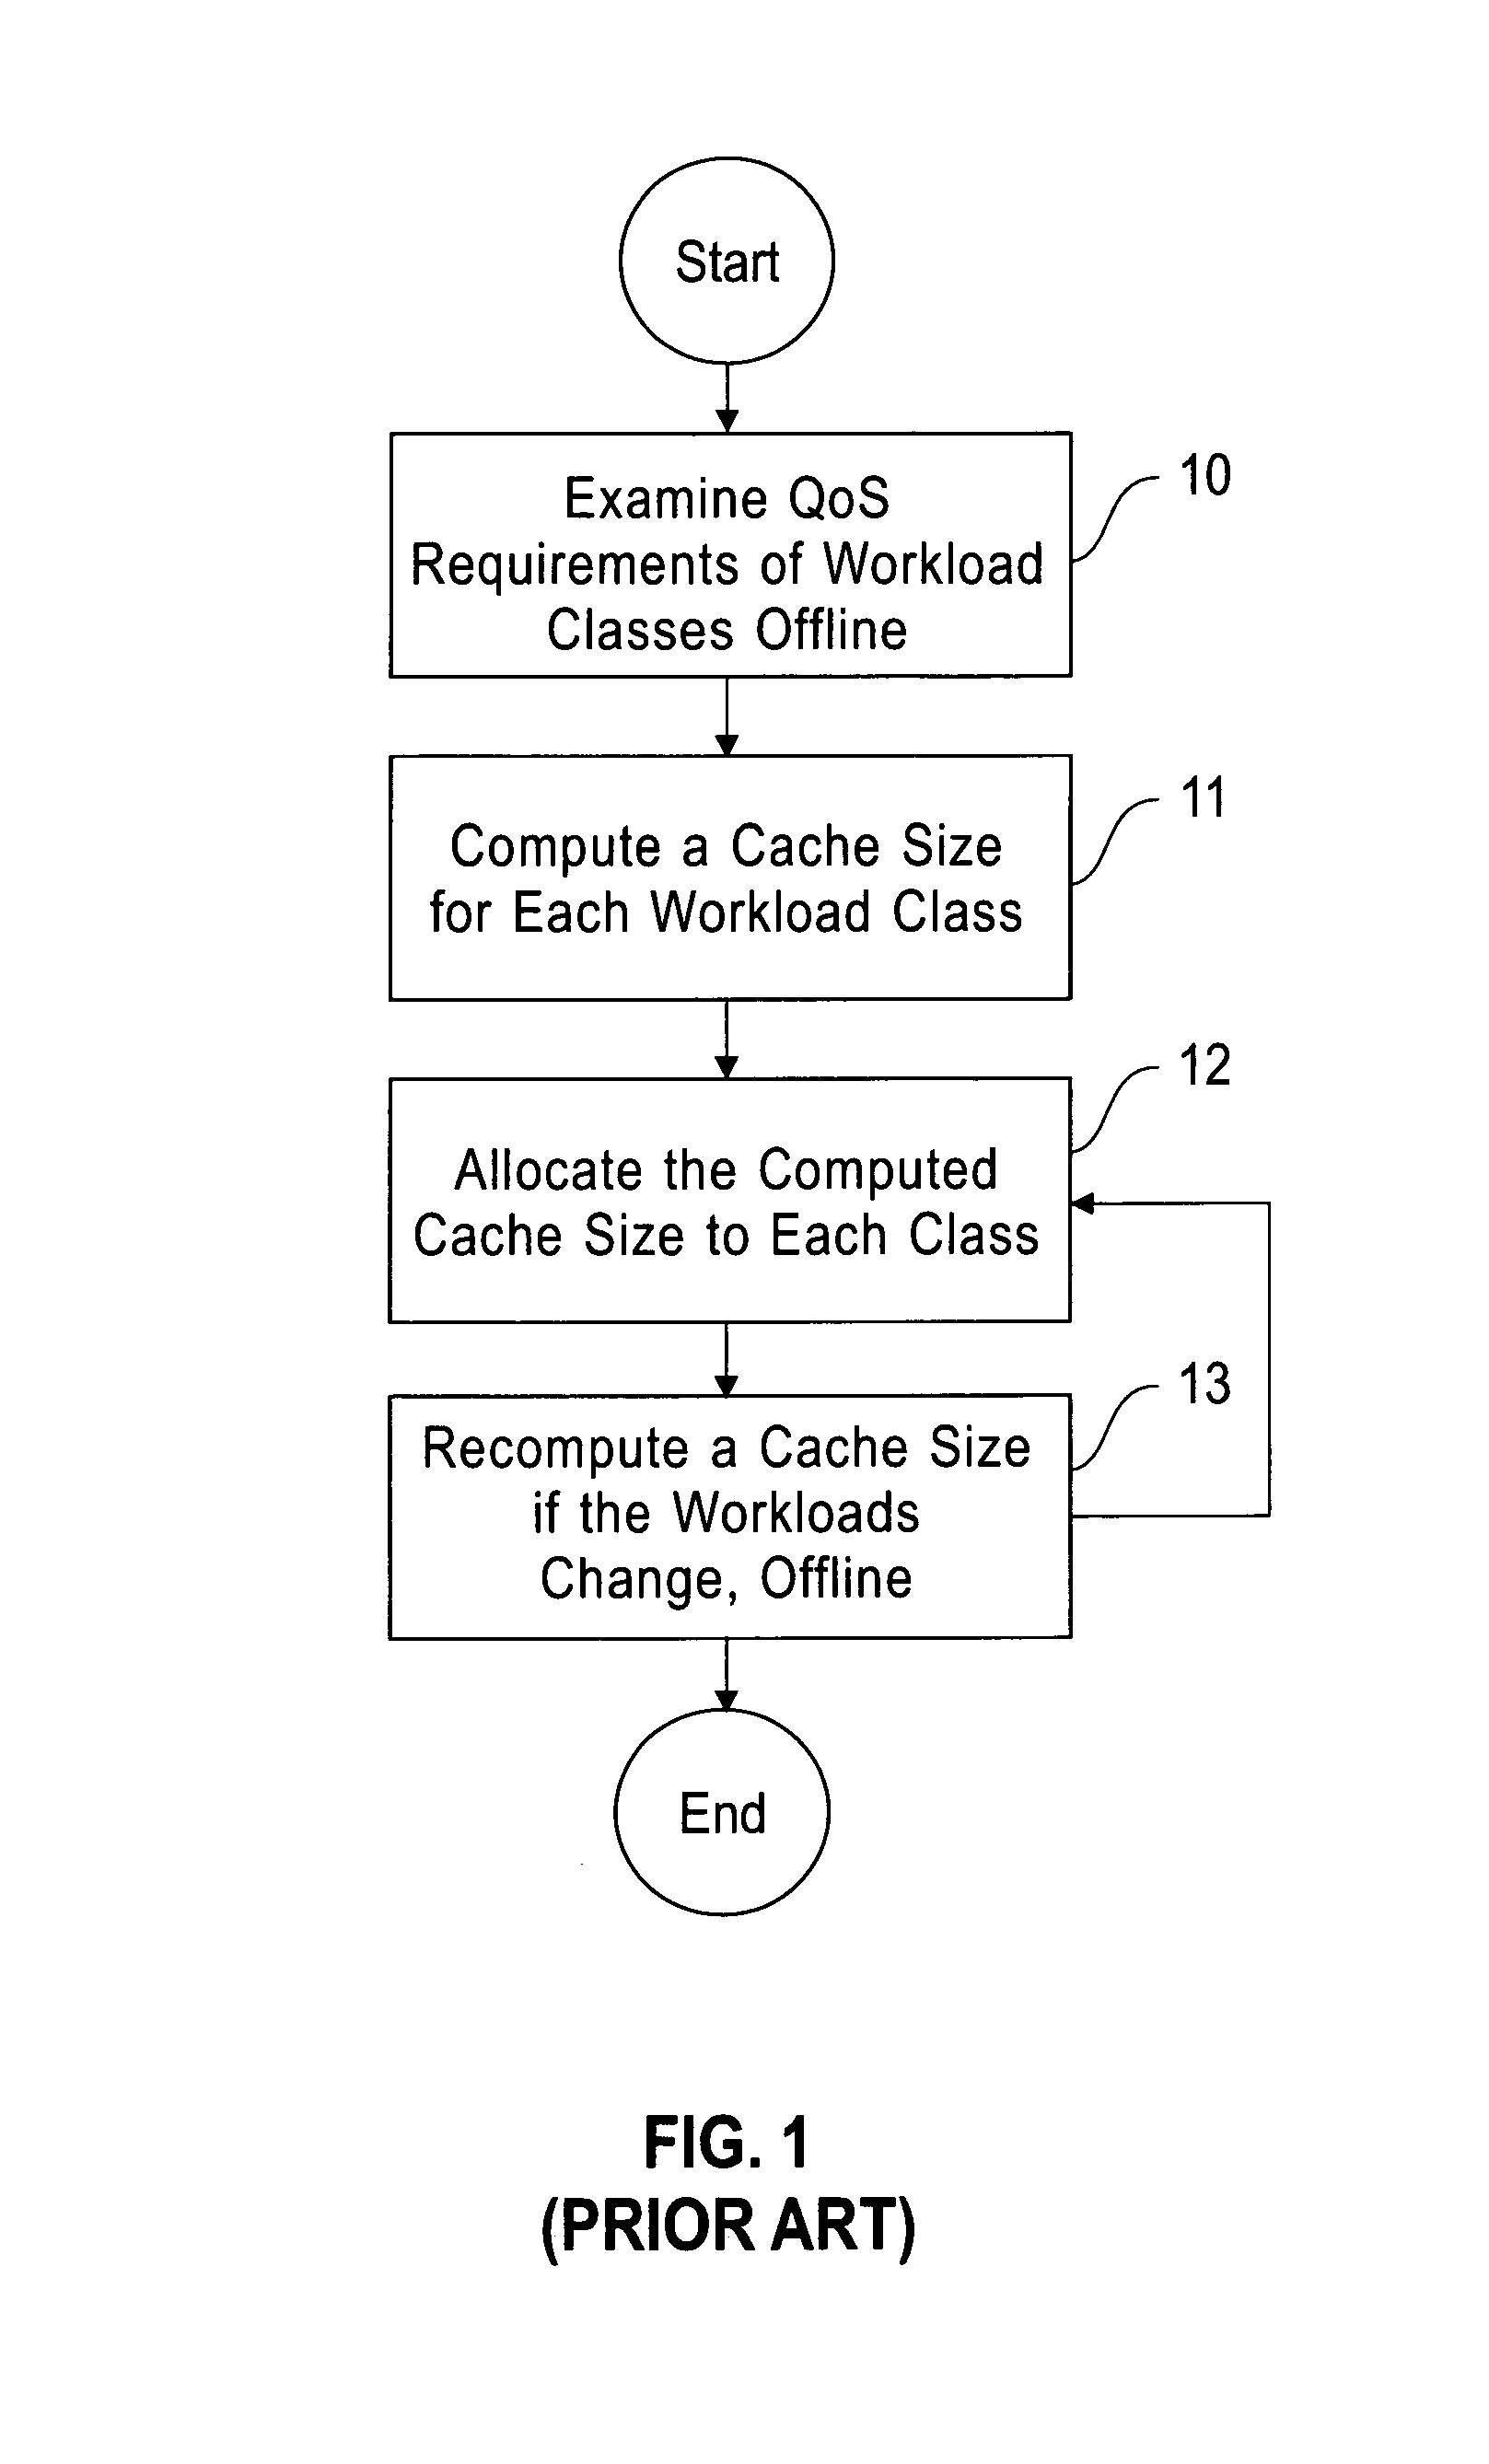 System and method for dynamically allocating cache space among different workload classes that can have different quality of service (QoS) requirements where the system and method may maintain a history of recently evicted pages for each class and may determine a future cache size for the class based on the history and the QoS requirements